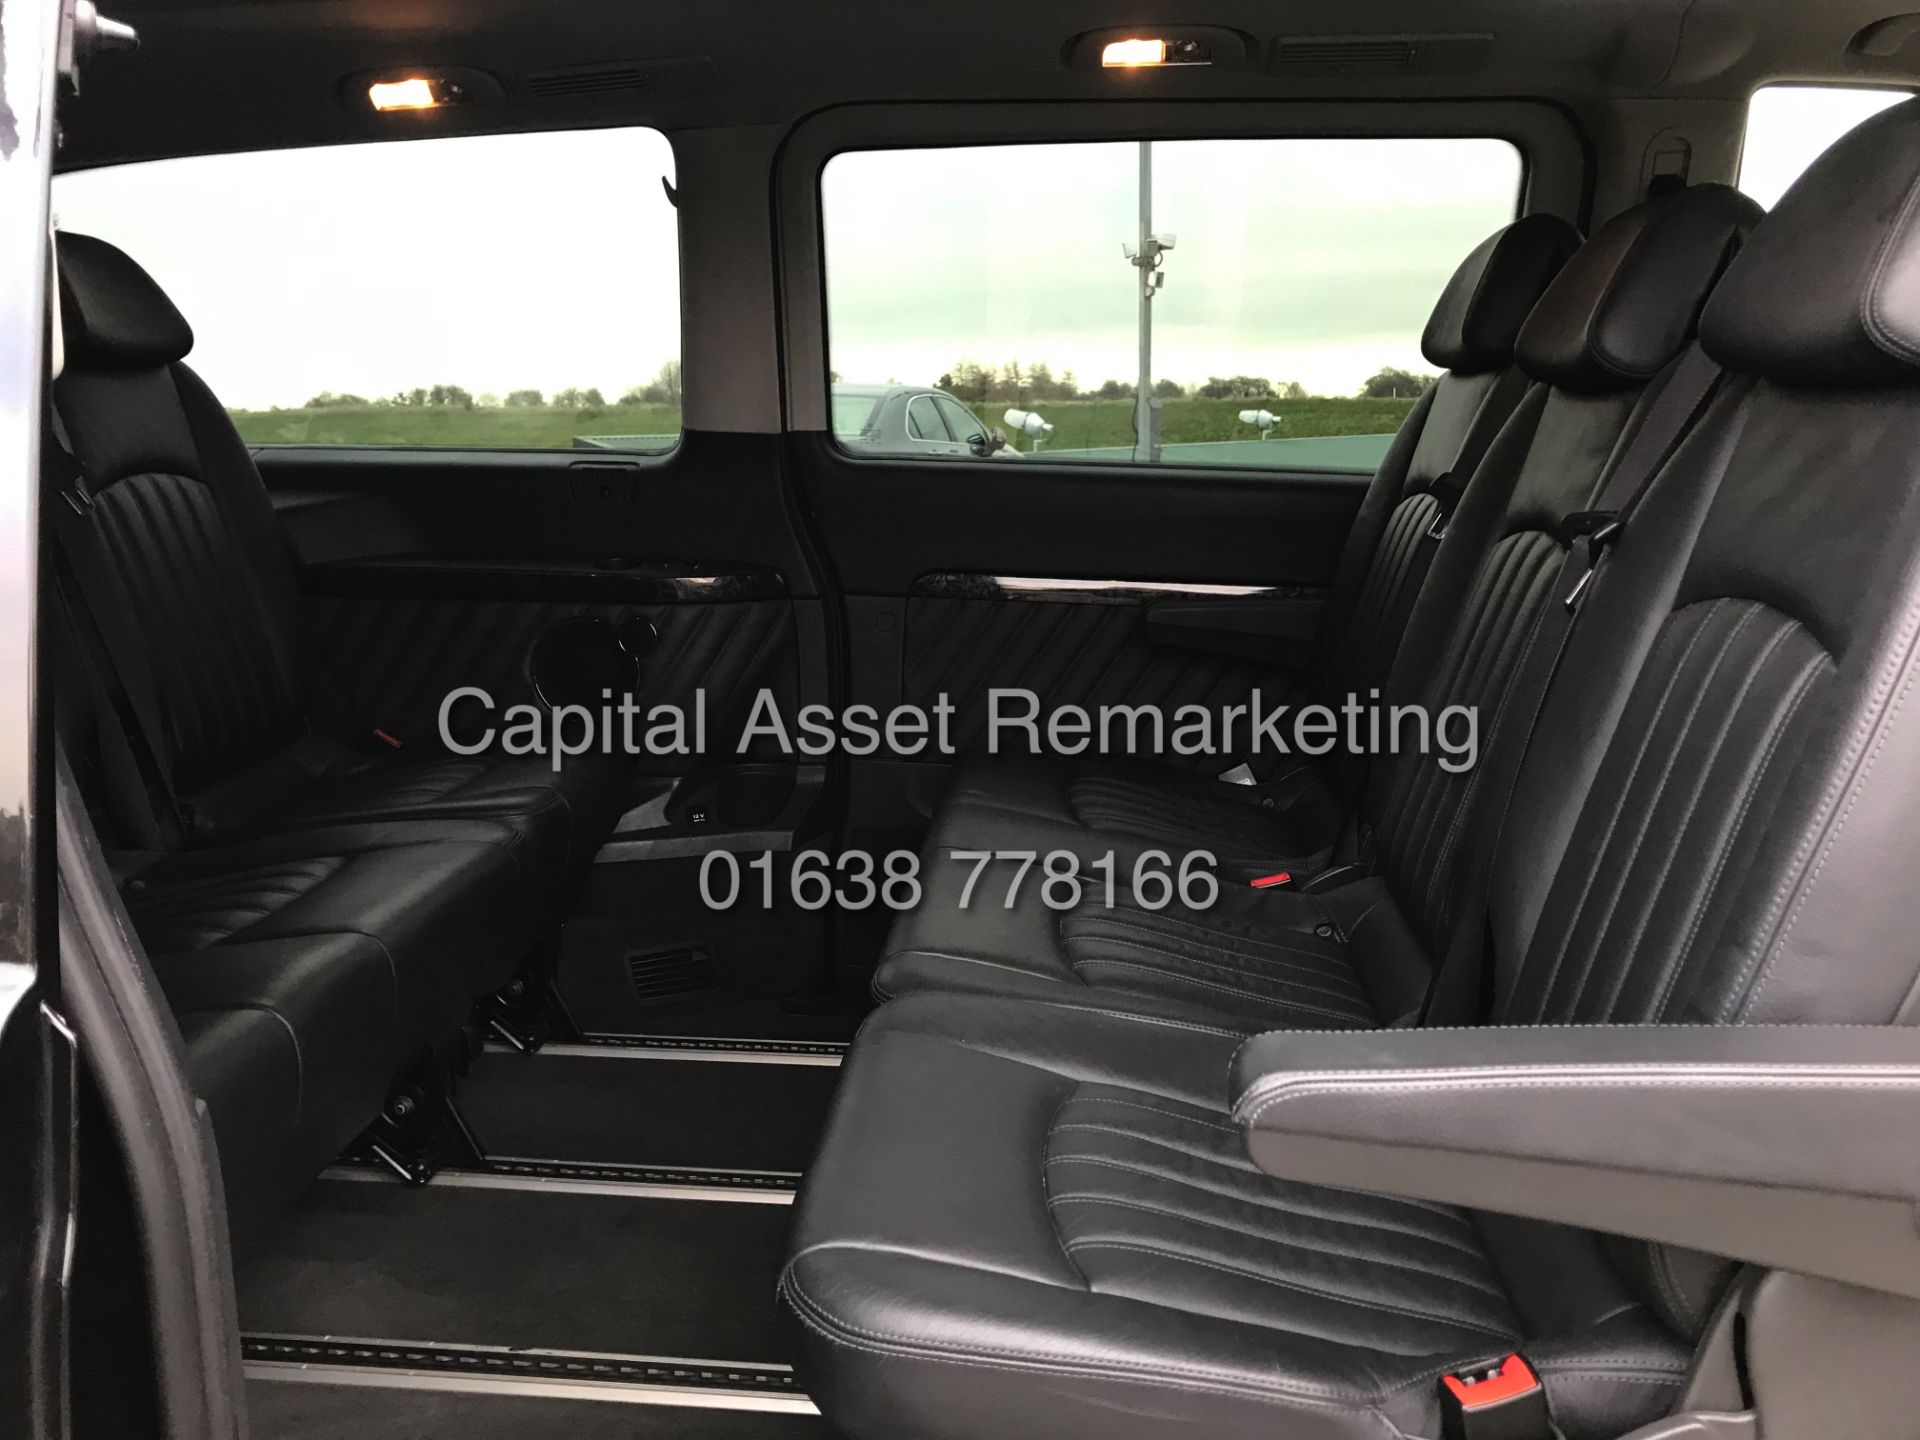 (ON SALE) MERCEDES VIANO 2.2CDI "AMBIENET" XLWB 8 SEATER (14 REG) 1 OWNER - FULLY LOADED - LEATHER - Image 23 of 28